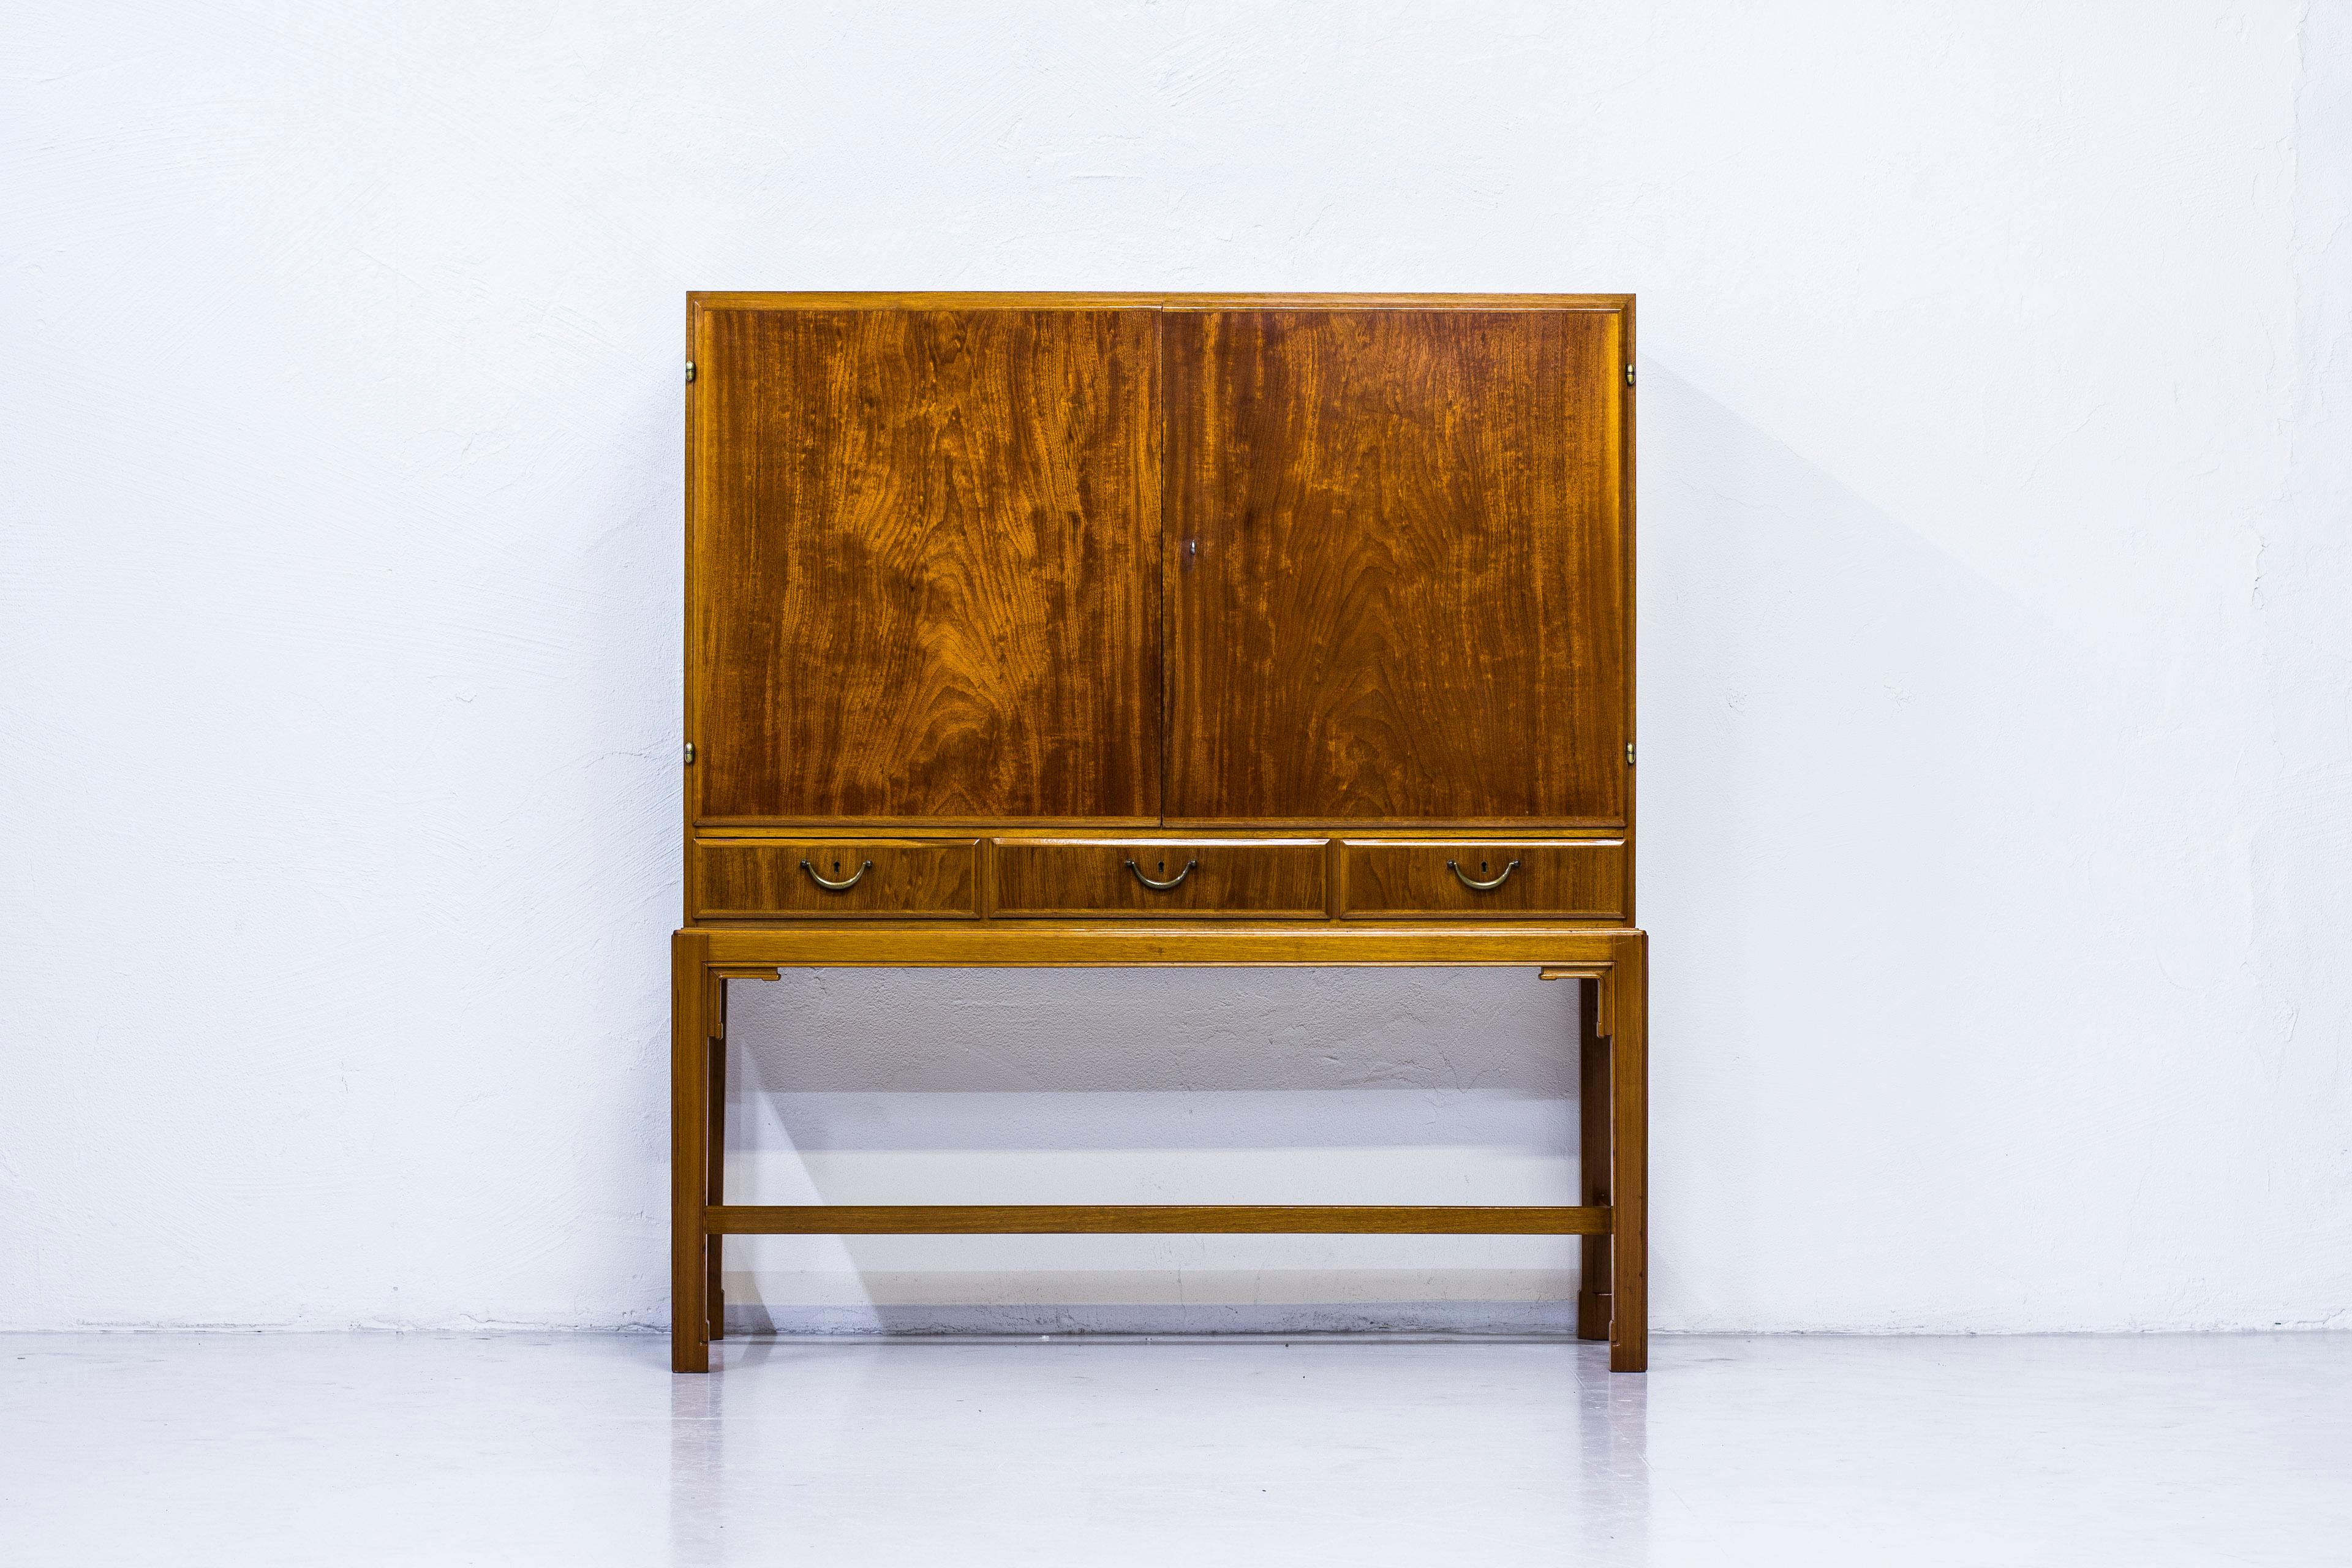 Cabinet designed by Architect John Kärnhagen. Produced in Stockholm Sweden by his own workshop in 1948.  Outside made from elm and mahogany wood. The inside made from beech wood and walnut. Brass handles and hinges. One original key.  Very good